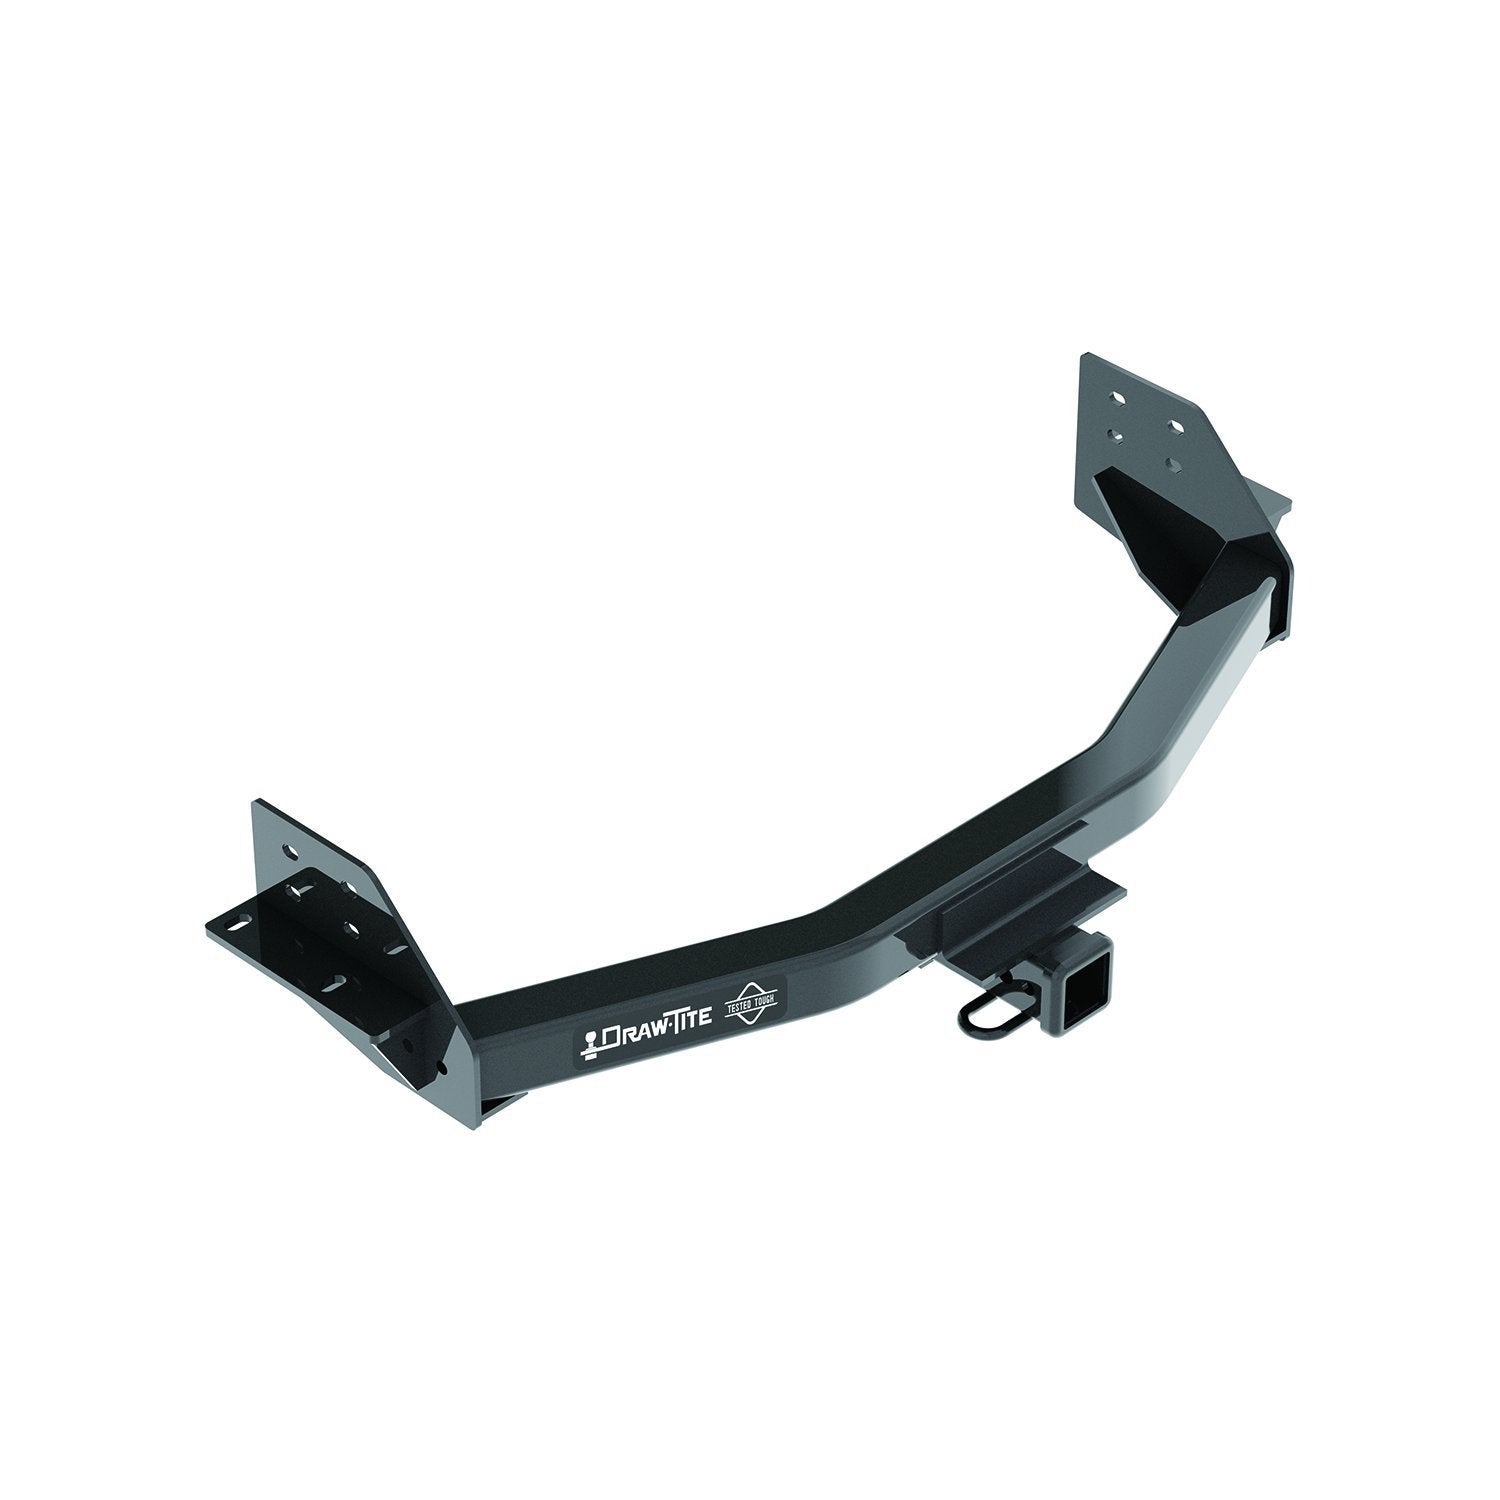 Draw-Tite Towing/Trailer Hitch (Frame Receiver) 75220 for 2013-2021 Isuzu Mux